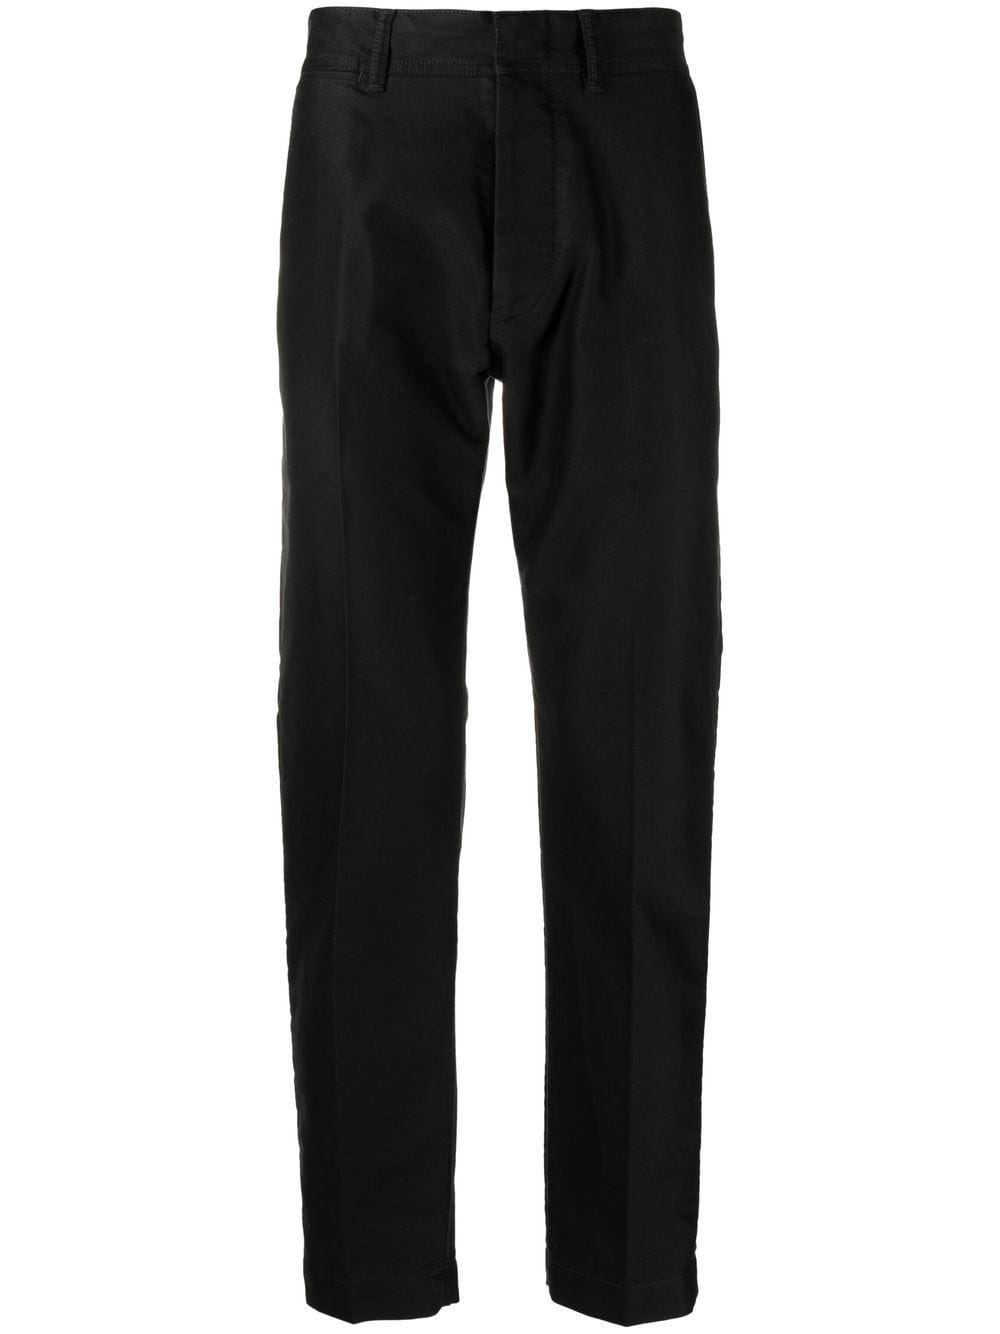 TOM FORD PRESSED-CREASE COTTON CHINOS